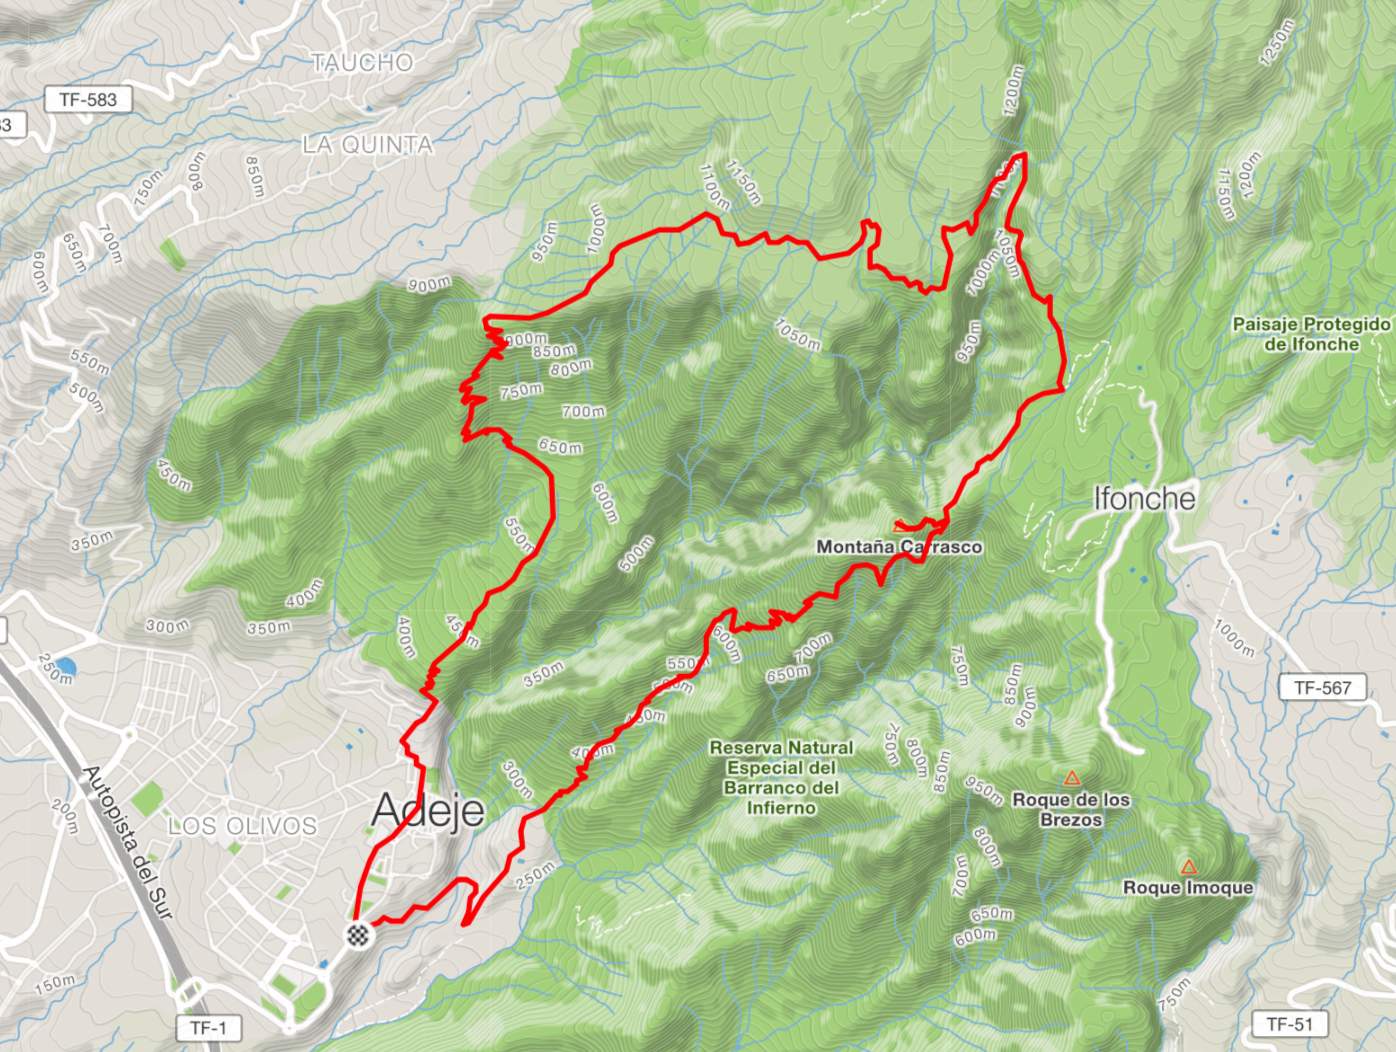 The map of the route: Adeje to Montana Carrasco, Tenerife, created with Strava routes.